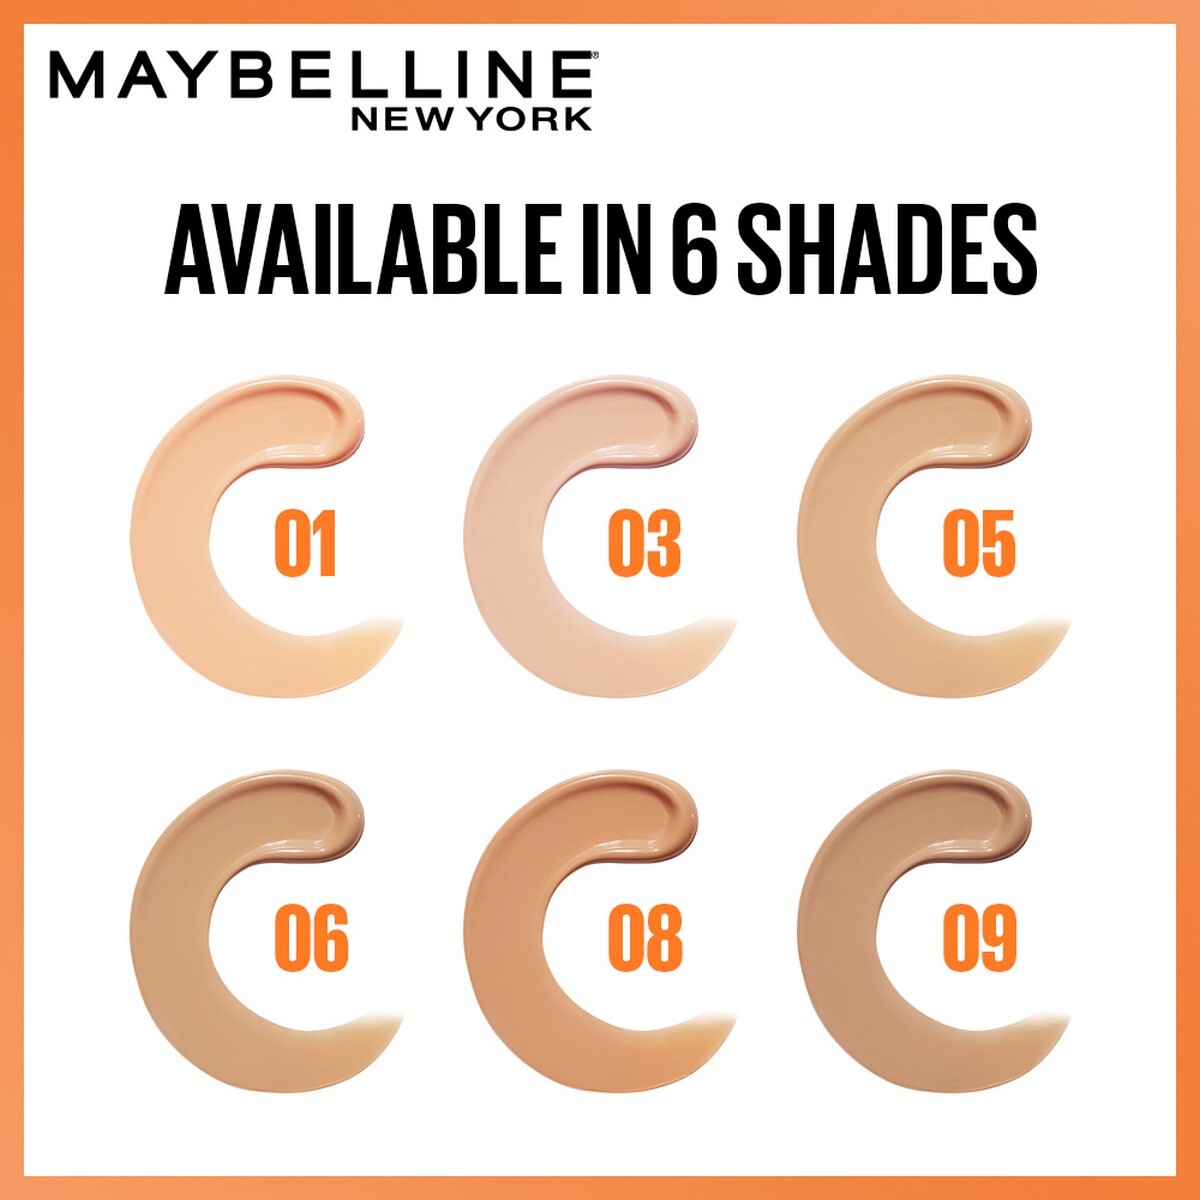 Maybelline New York Fit Me Fresh Tint With SPF 50 & Vitamin C, Shade 09 , Natural Coverage Skin Tint For Daily Use